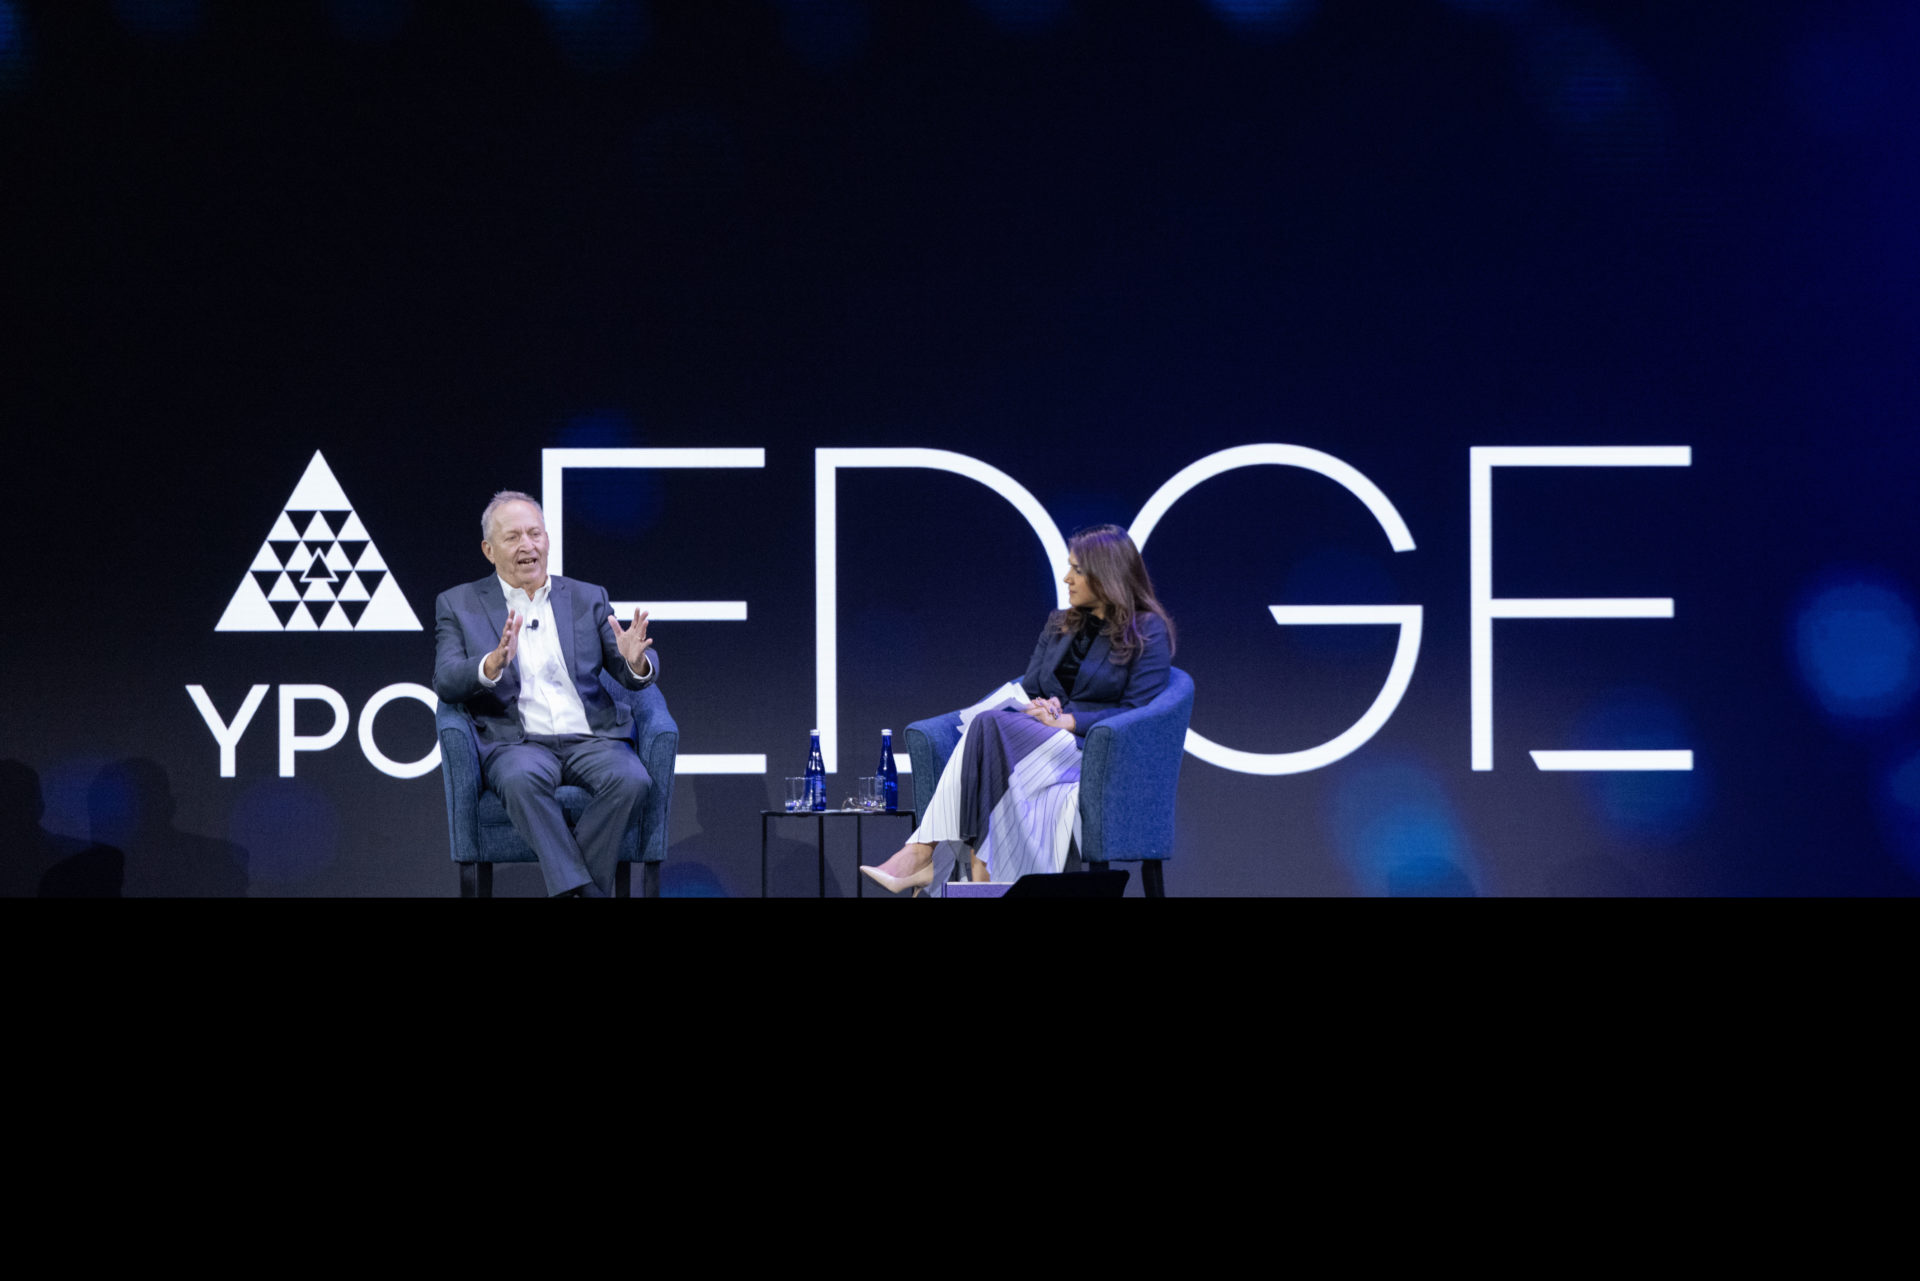 Opportunity in Crisis – Larry Summers Opens YPO EDGE with Humor and Honesty